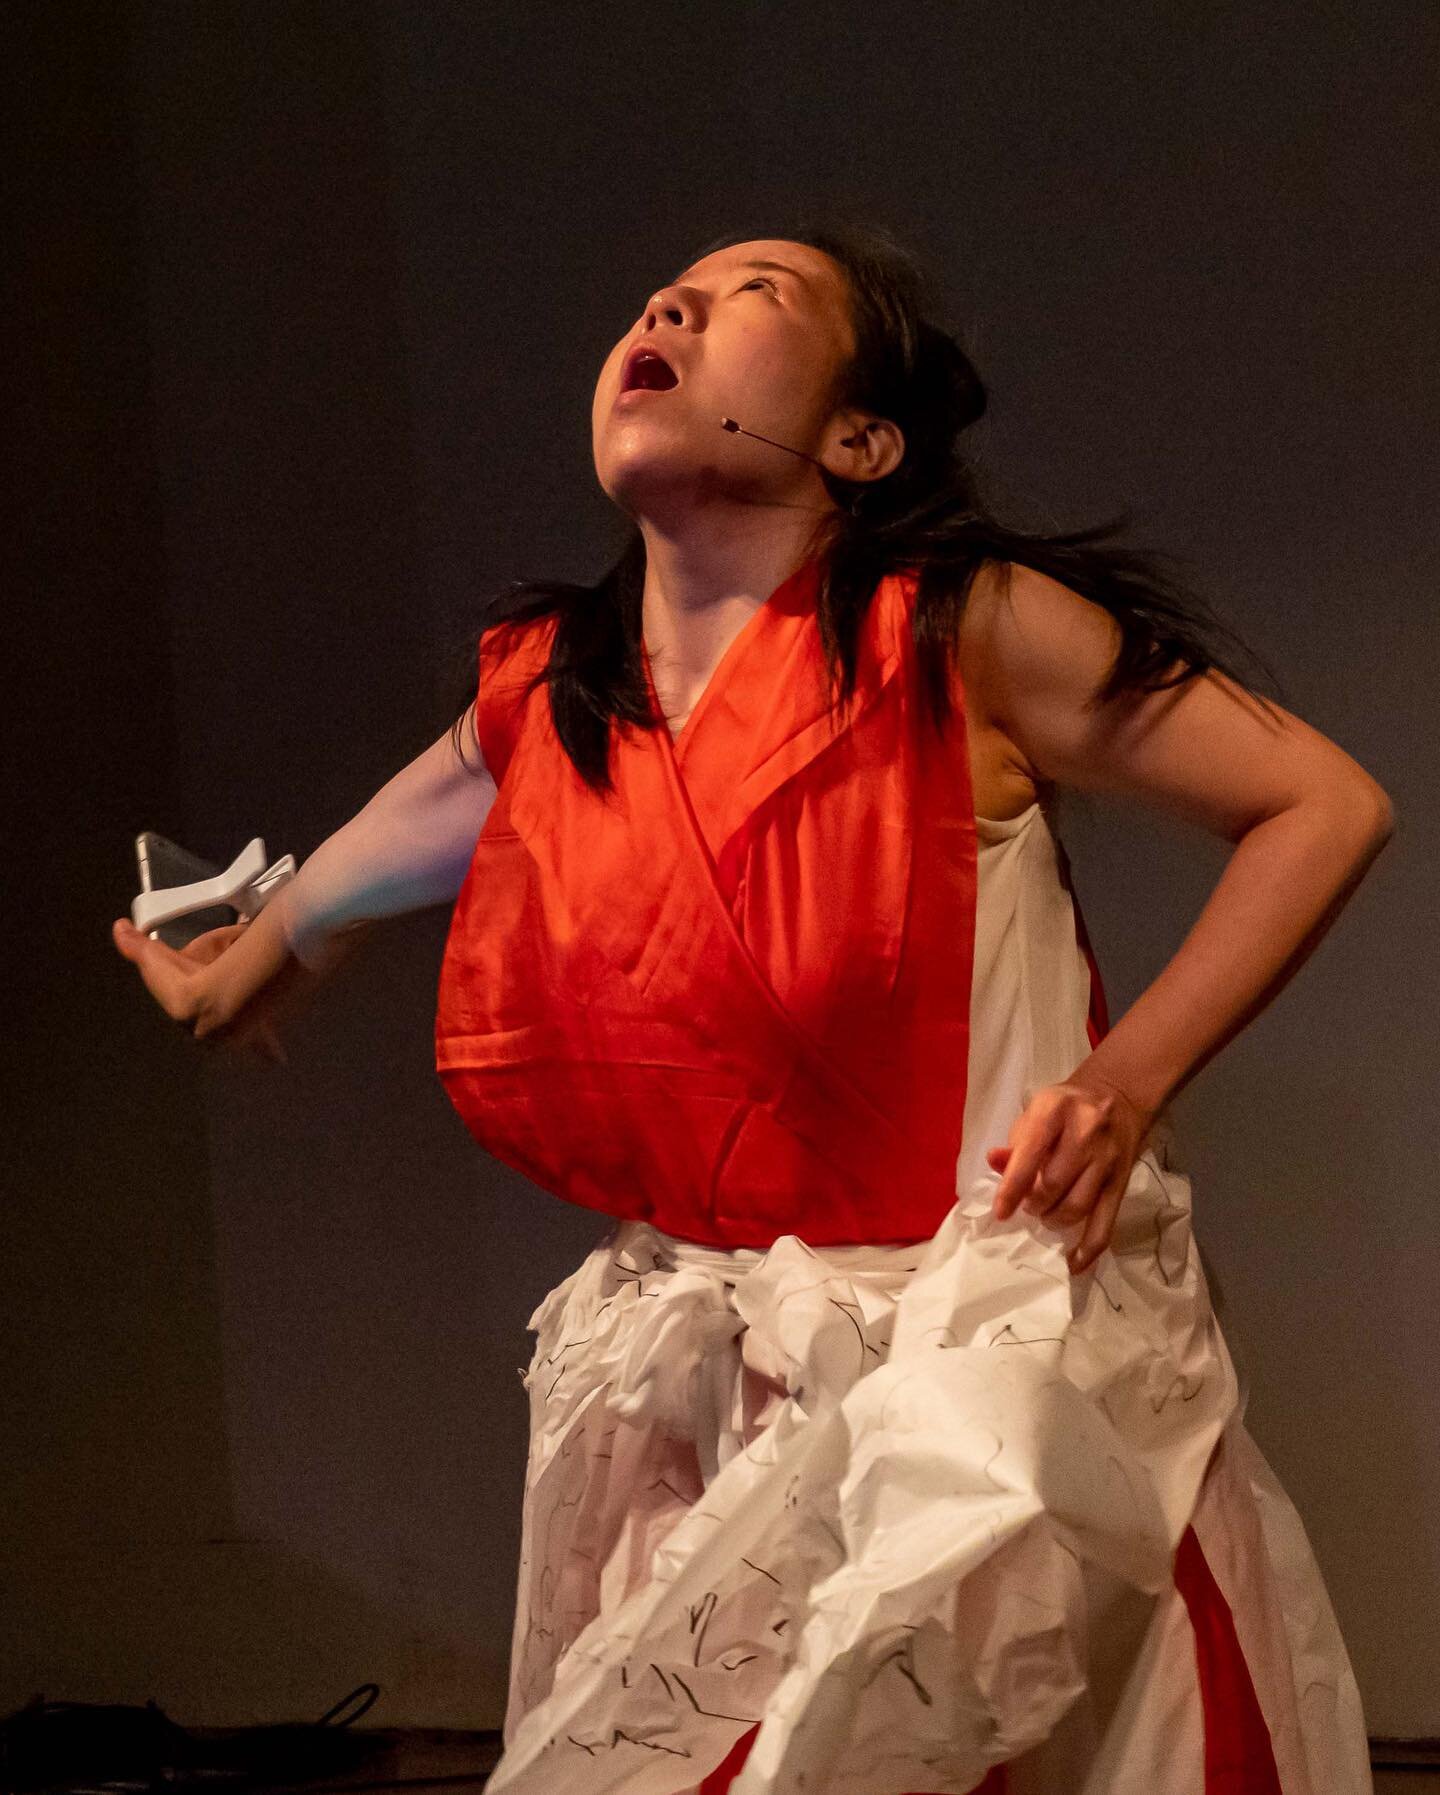 Join us next Saturday April 15 5-7p at Glasshouse

Jaguar Mary X, Kite aka Suzanne Kite, Aine Nakamura, Craig Chin, Al Margolis and WINCY

ECHO is dedicated to sonic performances, which explore themes of memory through reverberation, repetition or re